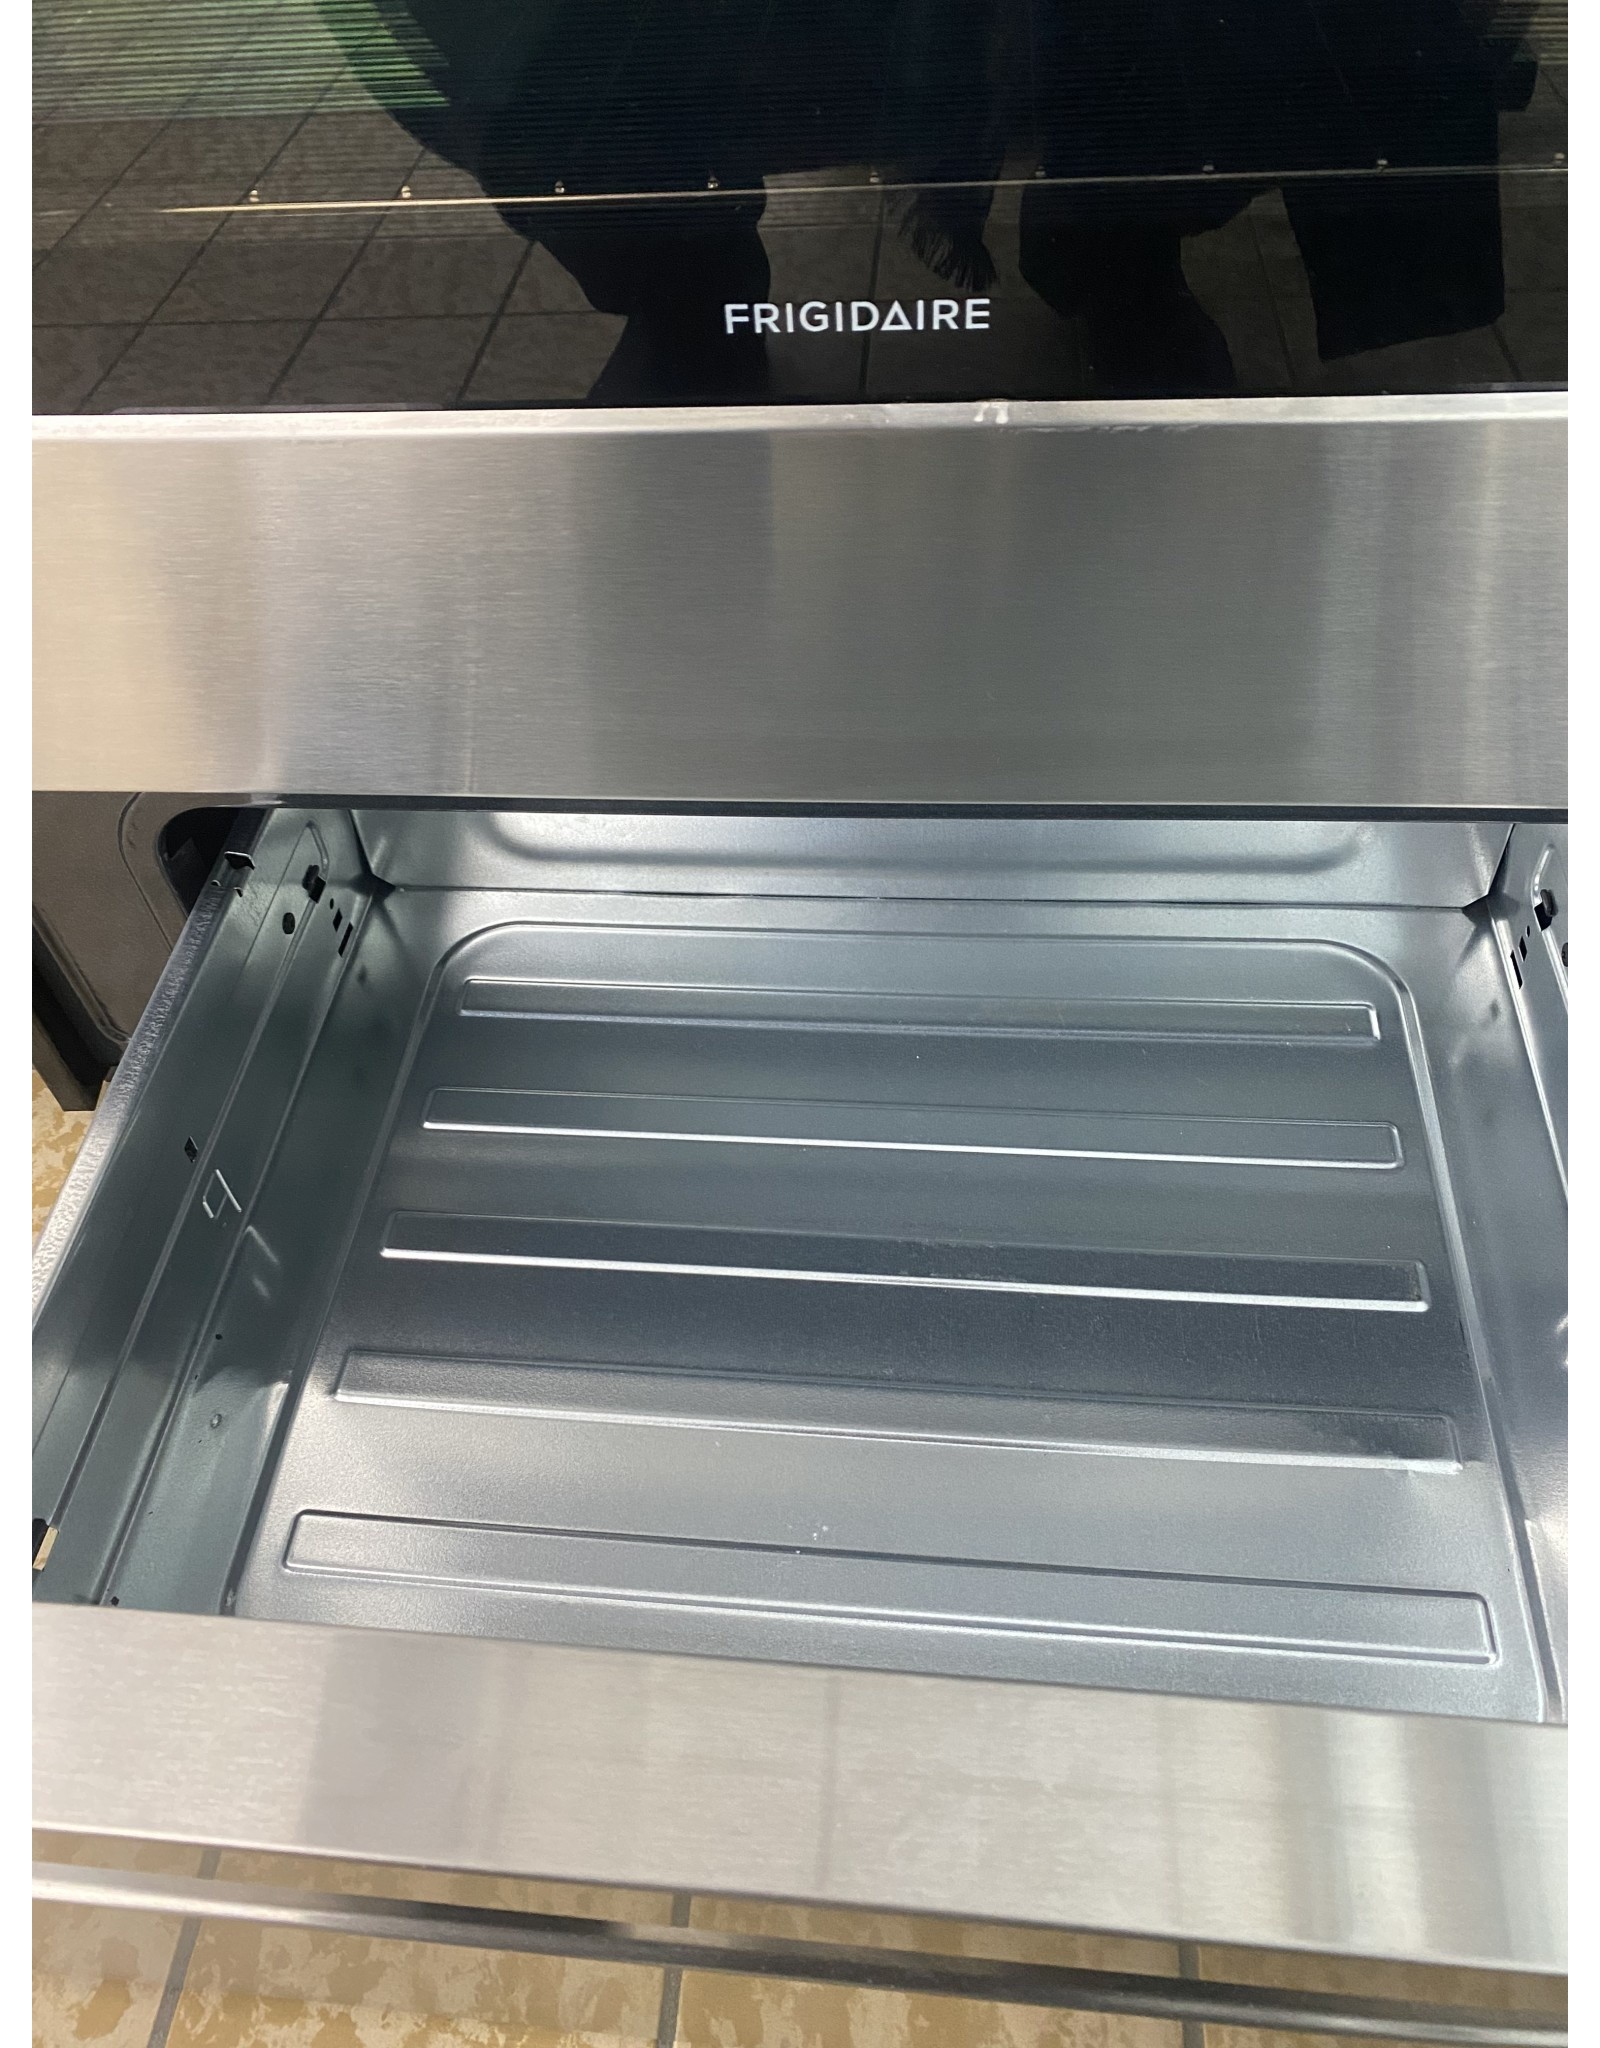 FRIGIDAIRE FFEH3054US  30 in. 5.0 cu. ft. Single Oven Electric Range with Self-Cleaning Oven in Stainless Steel